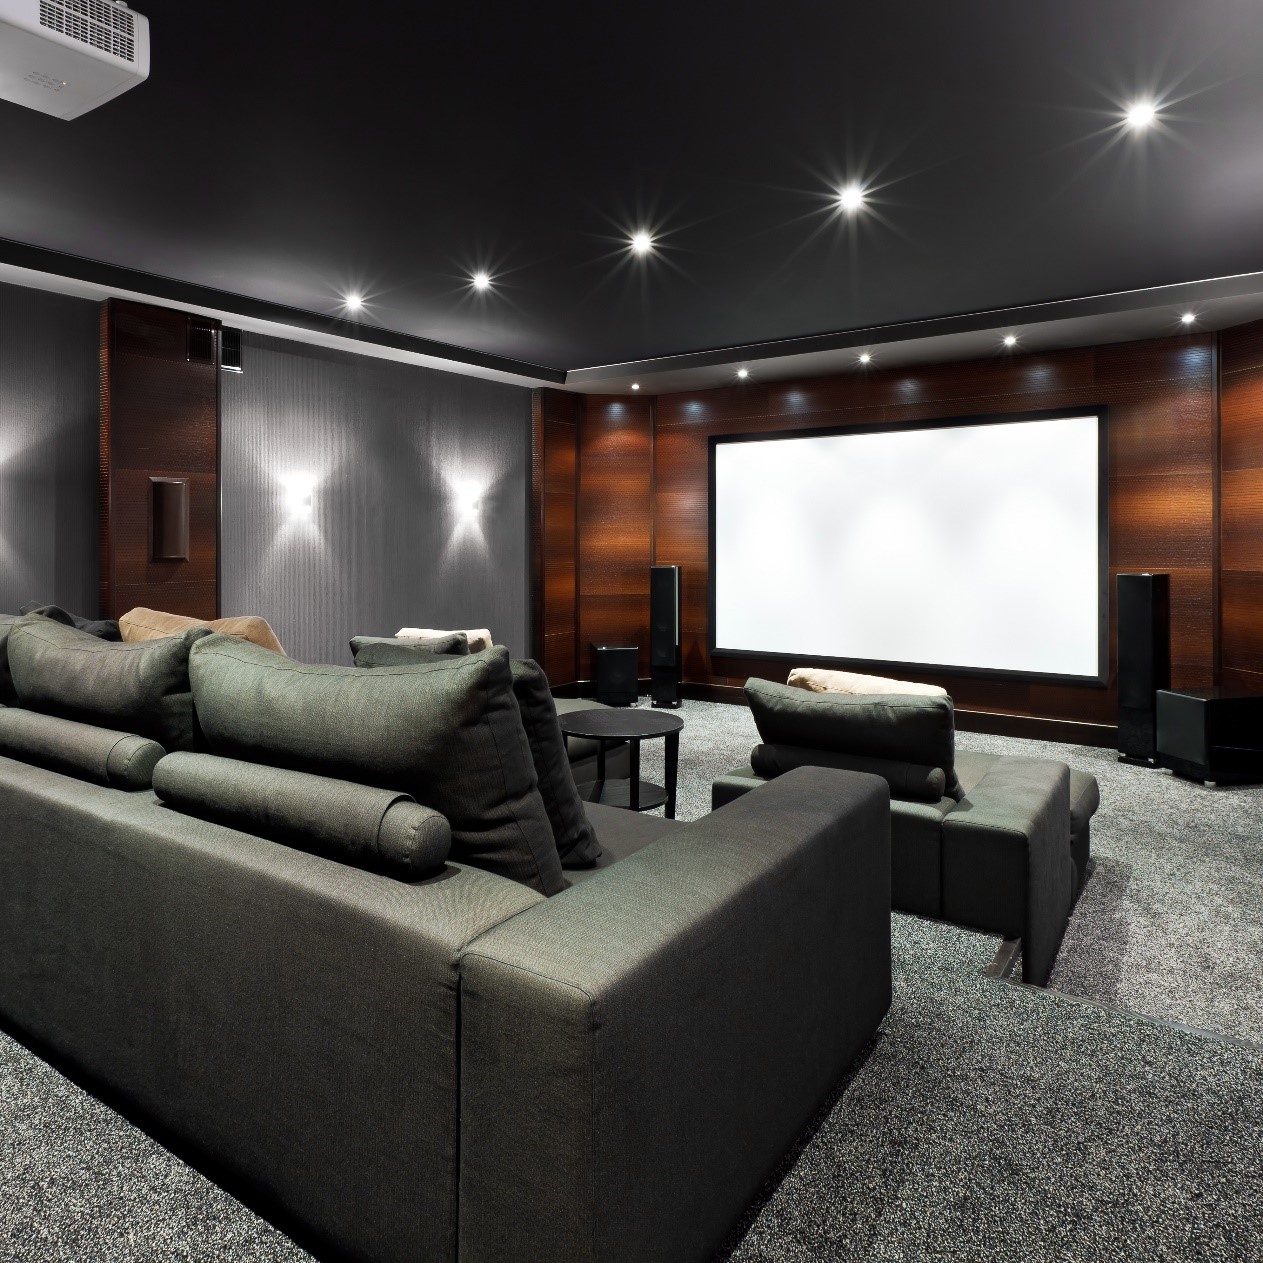 Should You Install 4K Technology in Your Custom Home Theatre?